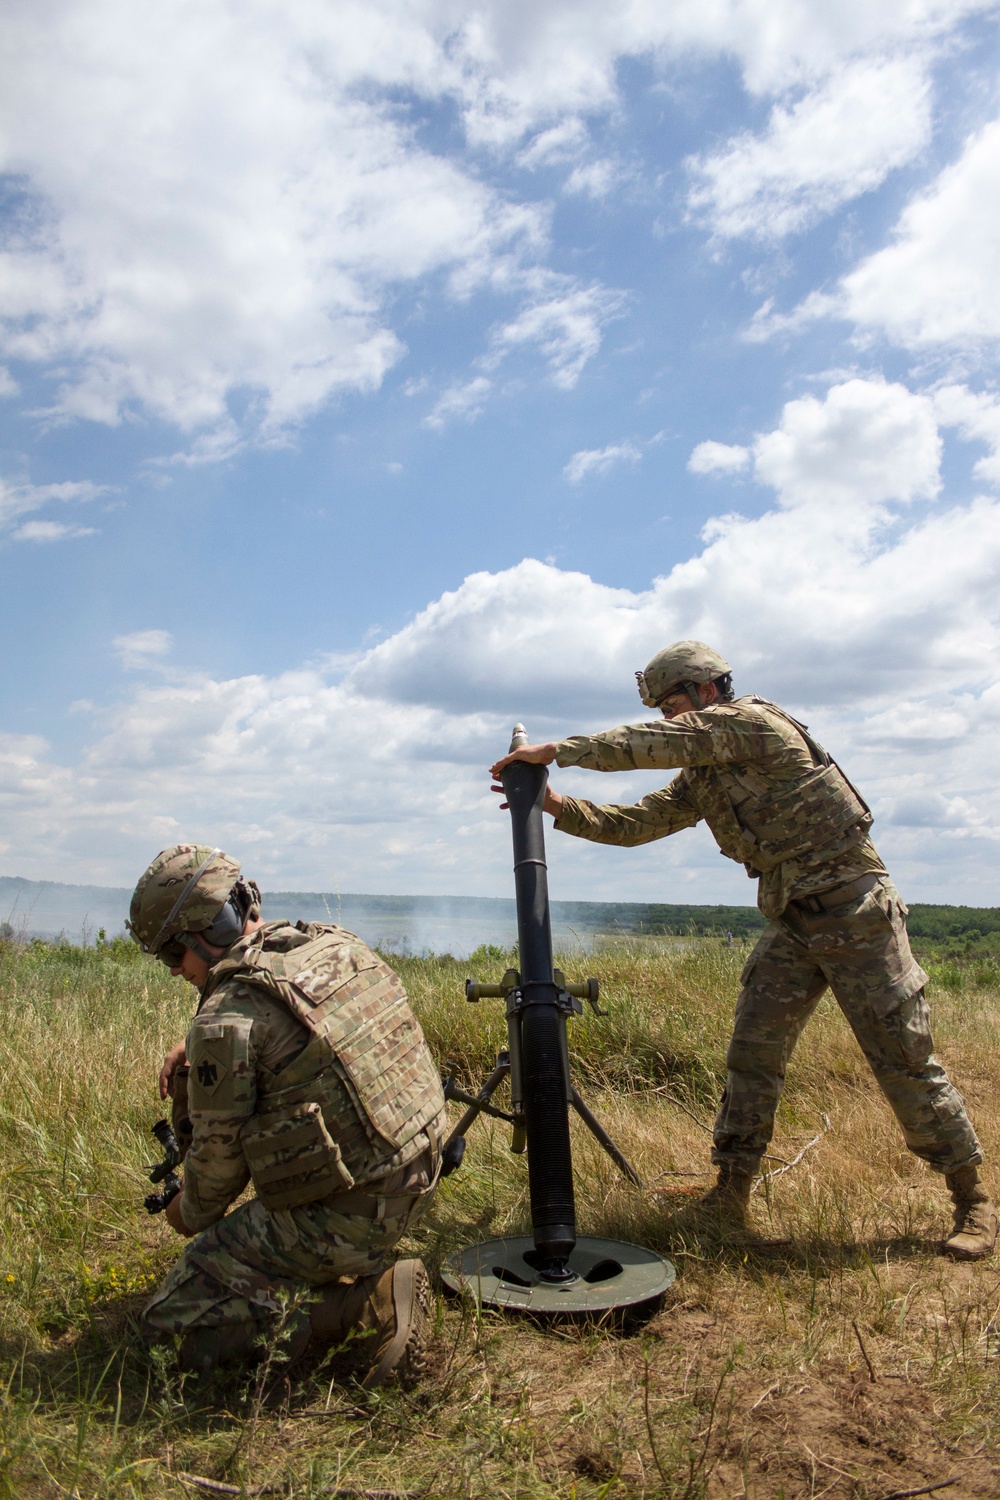 U.S. Soldiers train on mortars while deployed to Ukraine